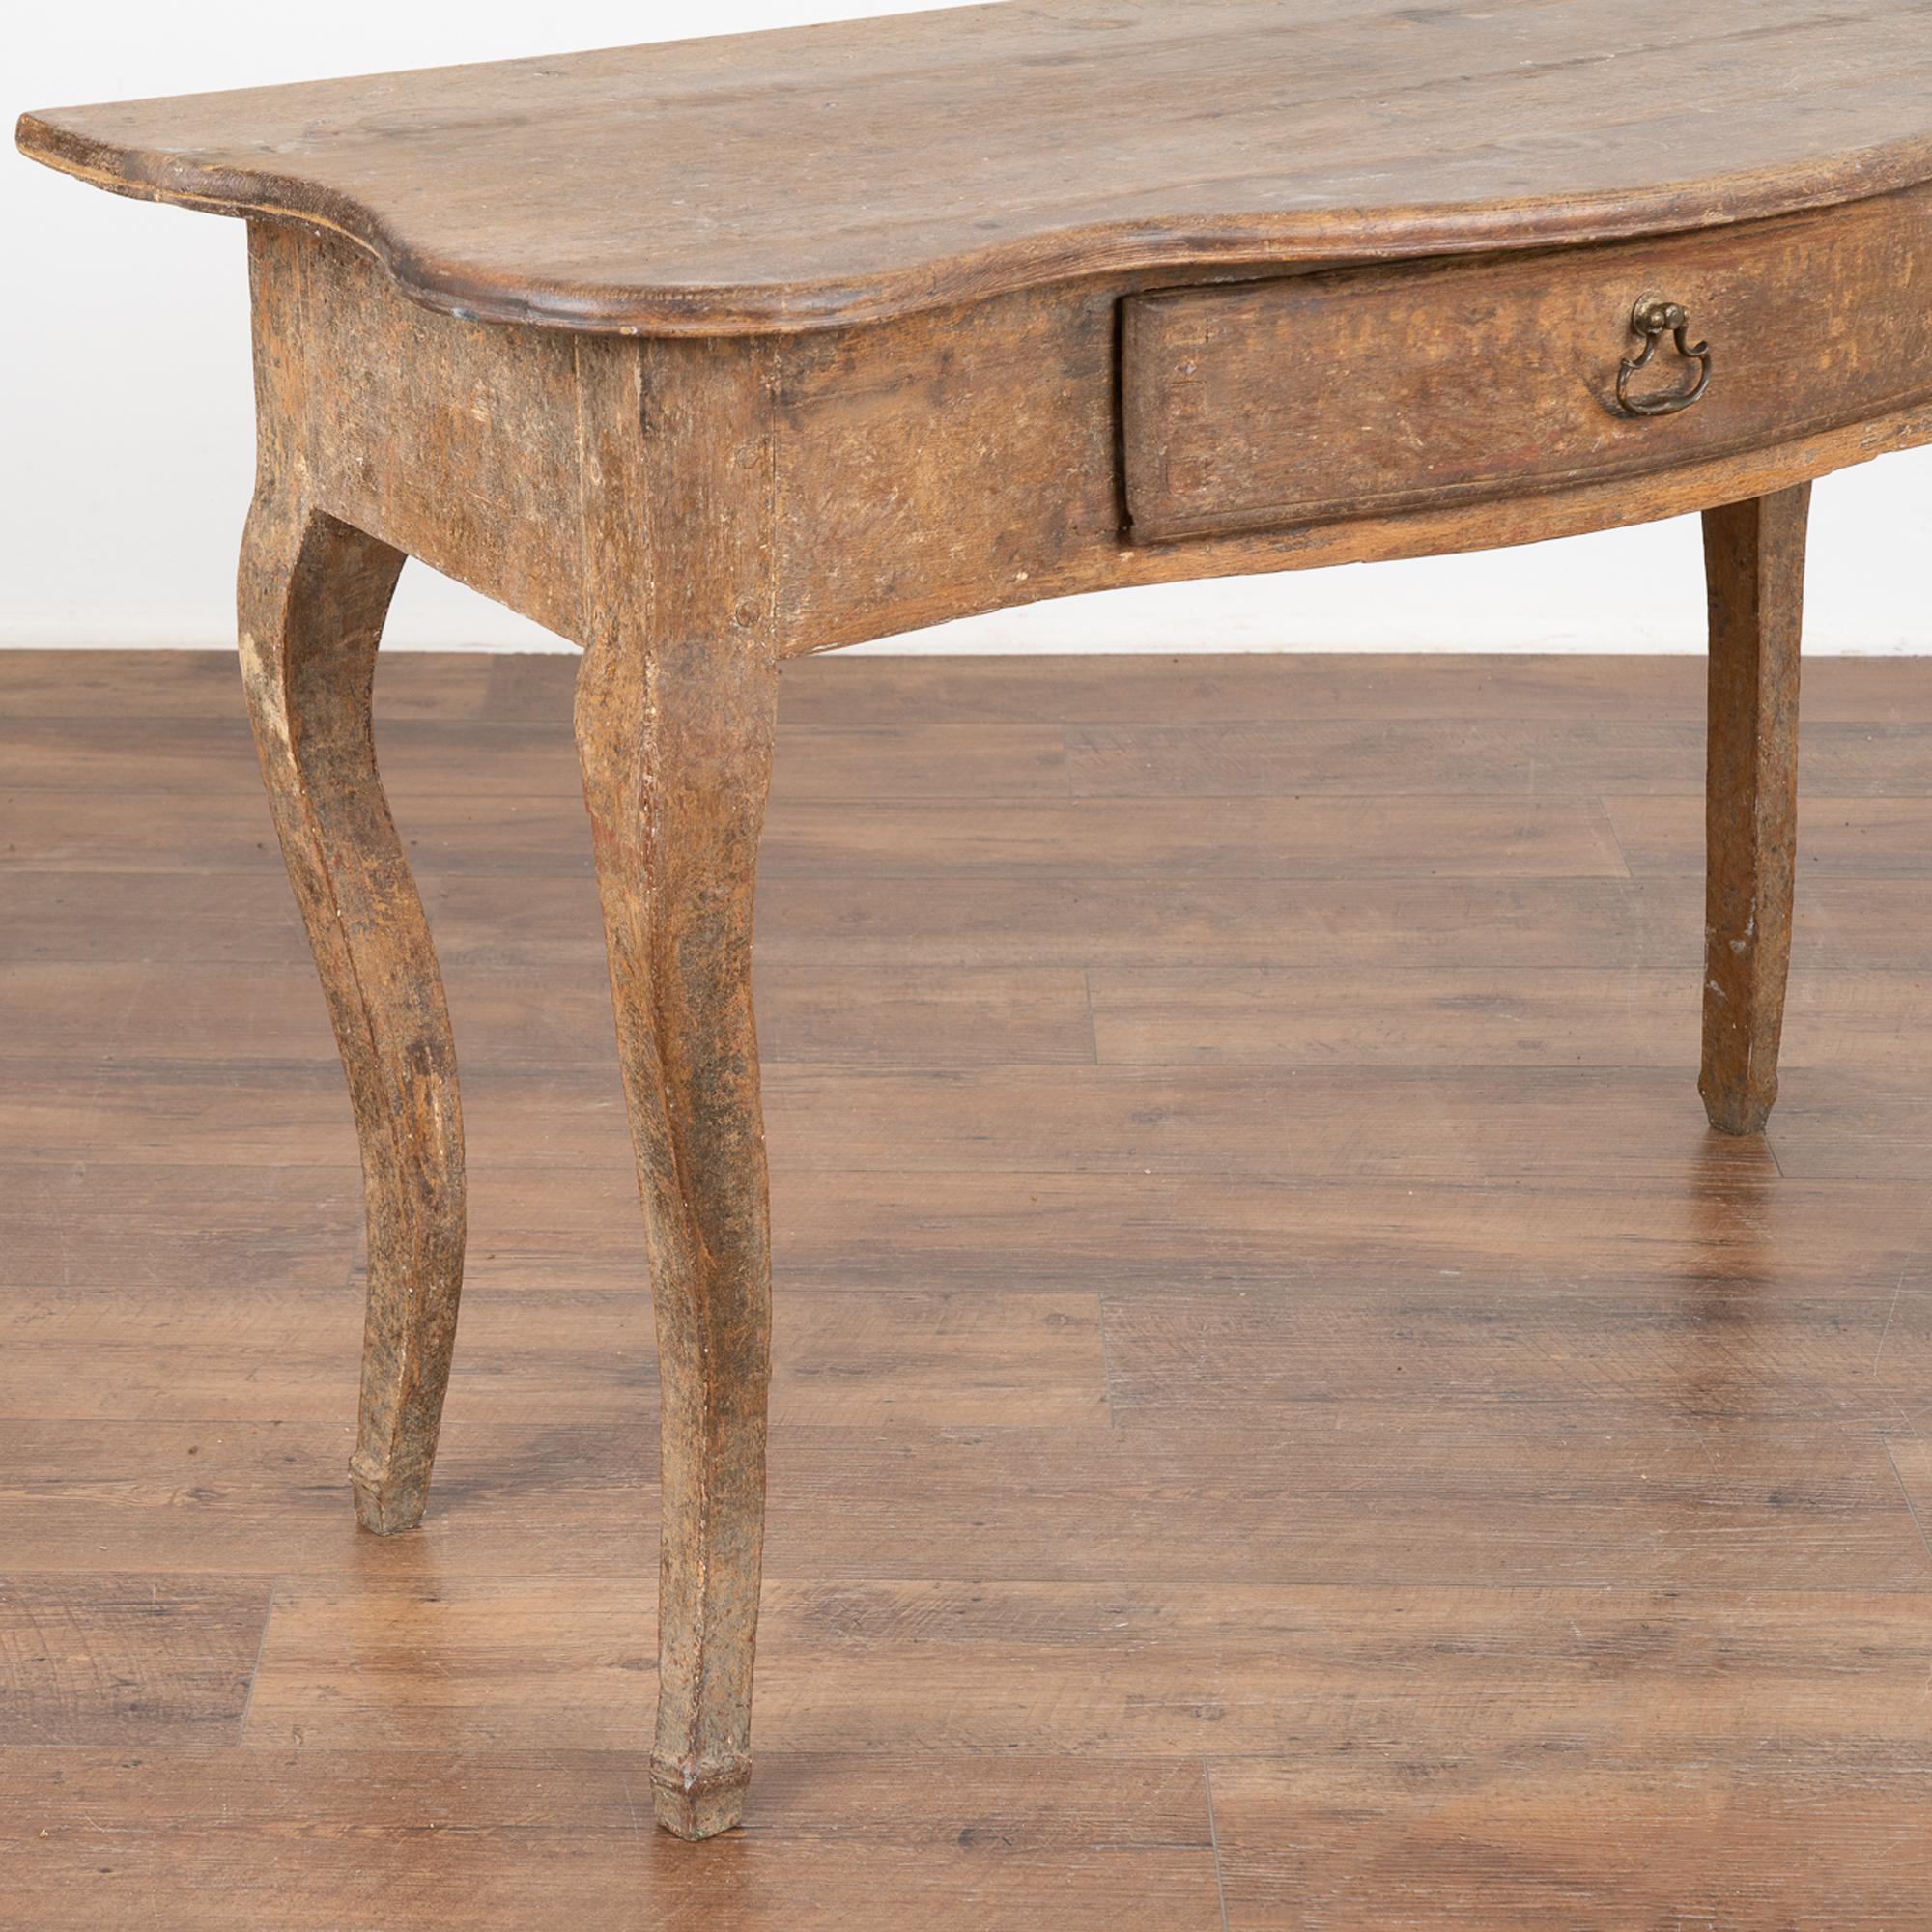 Oak Antique Rococo Pine Side Table with Drawer, Sweden circa 1770-80 For Sale